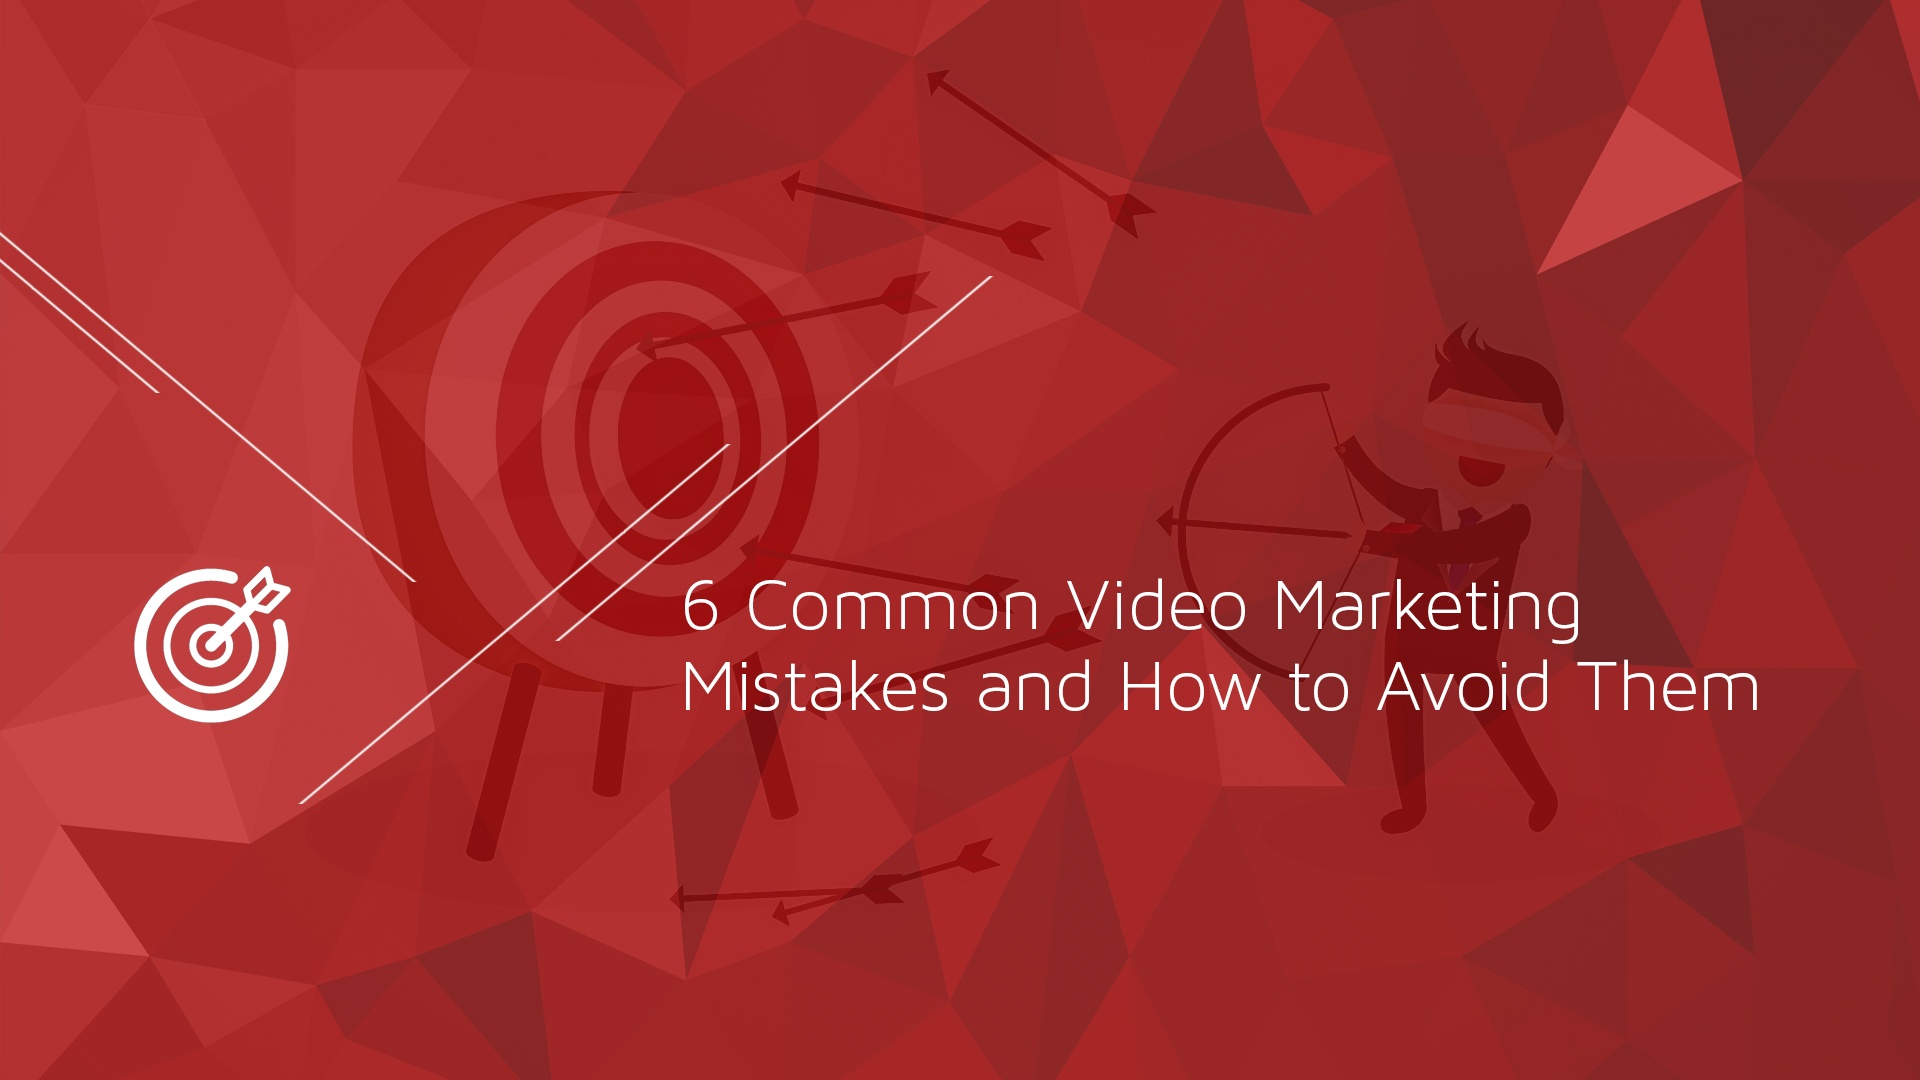 6 mon Video Marketing Mistakes and How to Avoid Them